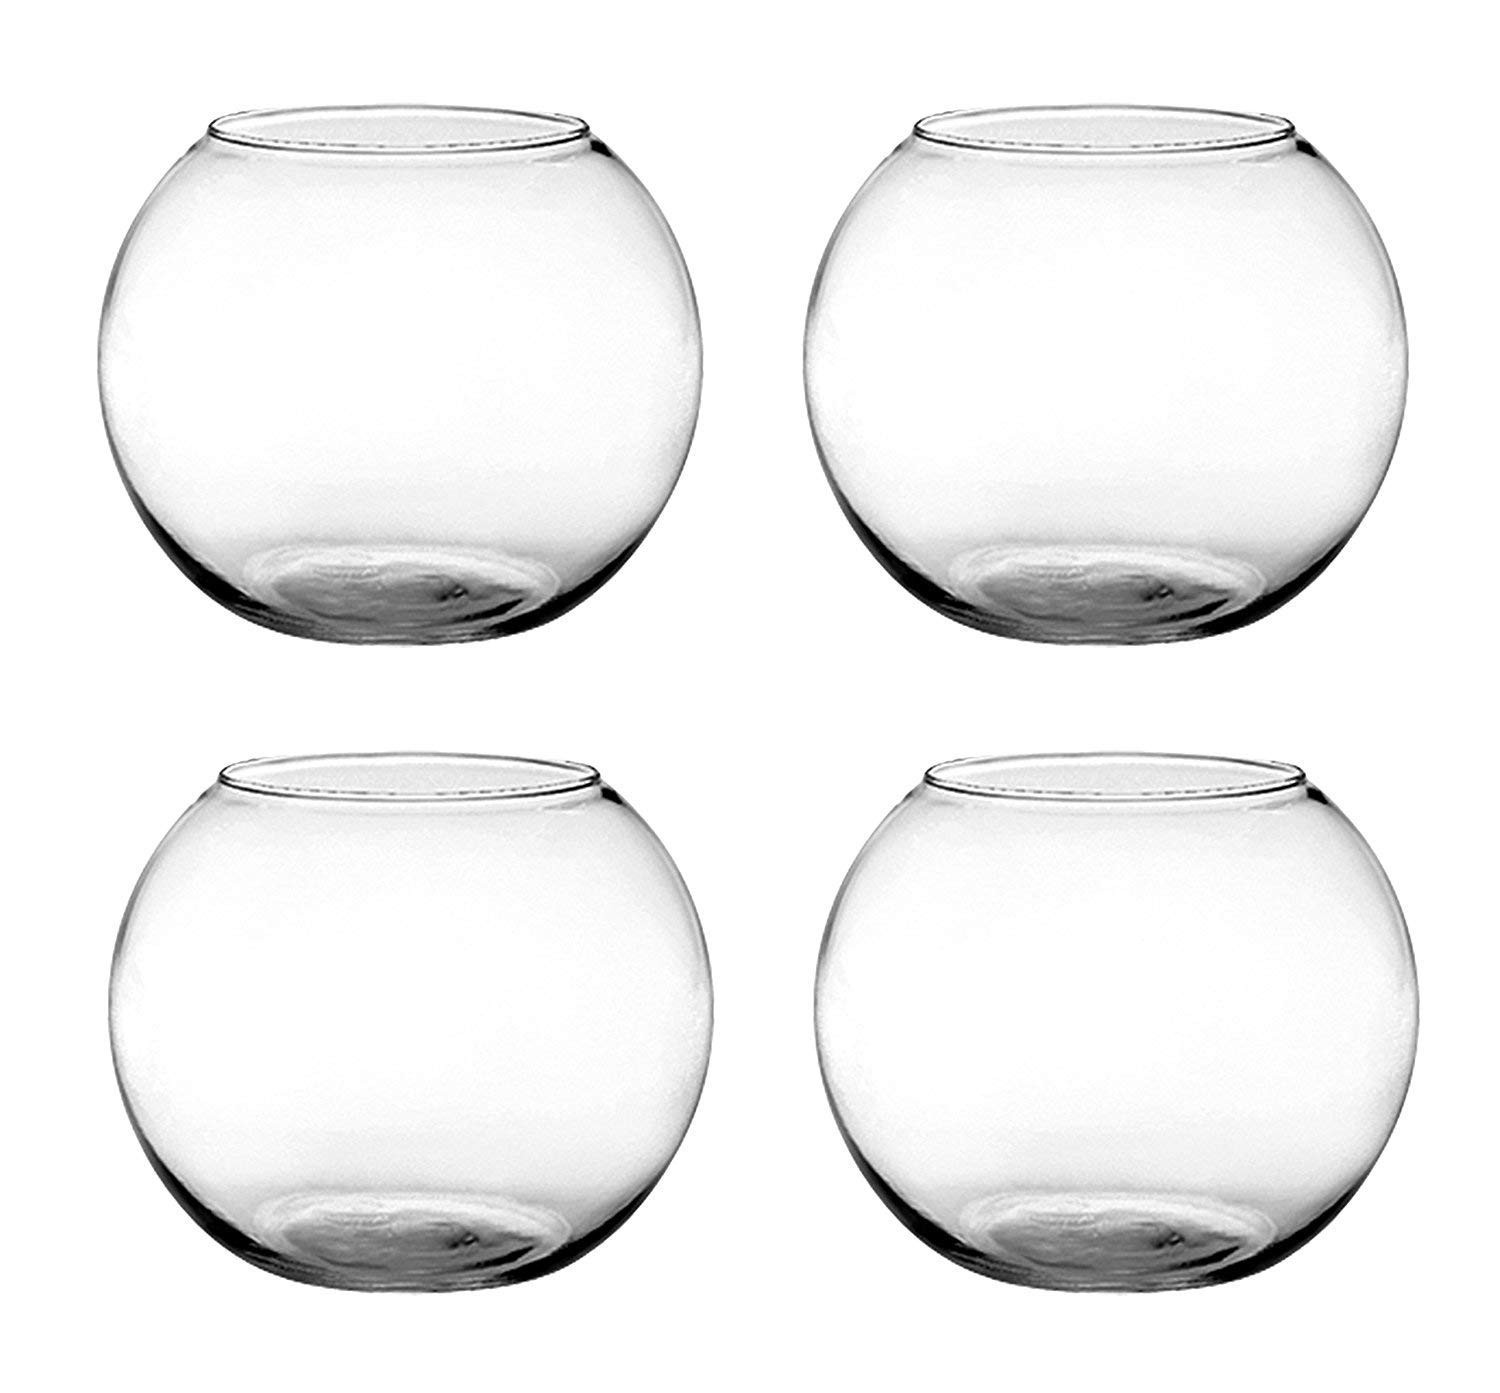 19 Ideal 24 Inch Tall Glass Vases 2024 free download 24 inch tall glass vases of amazon com floral supply online set of 4 6 rose bowls glass inside amazon com floral supply online set of 4 6 rose bowls glass round vases for weddings events dec